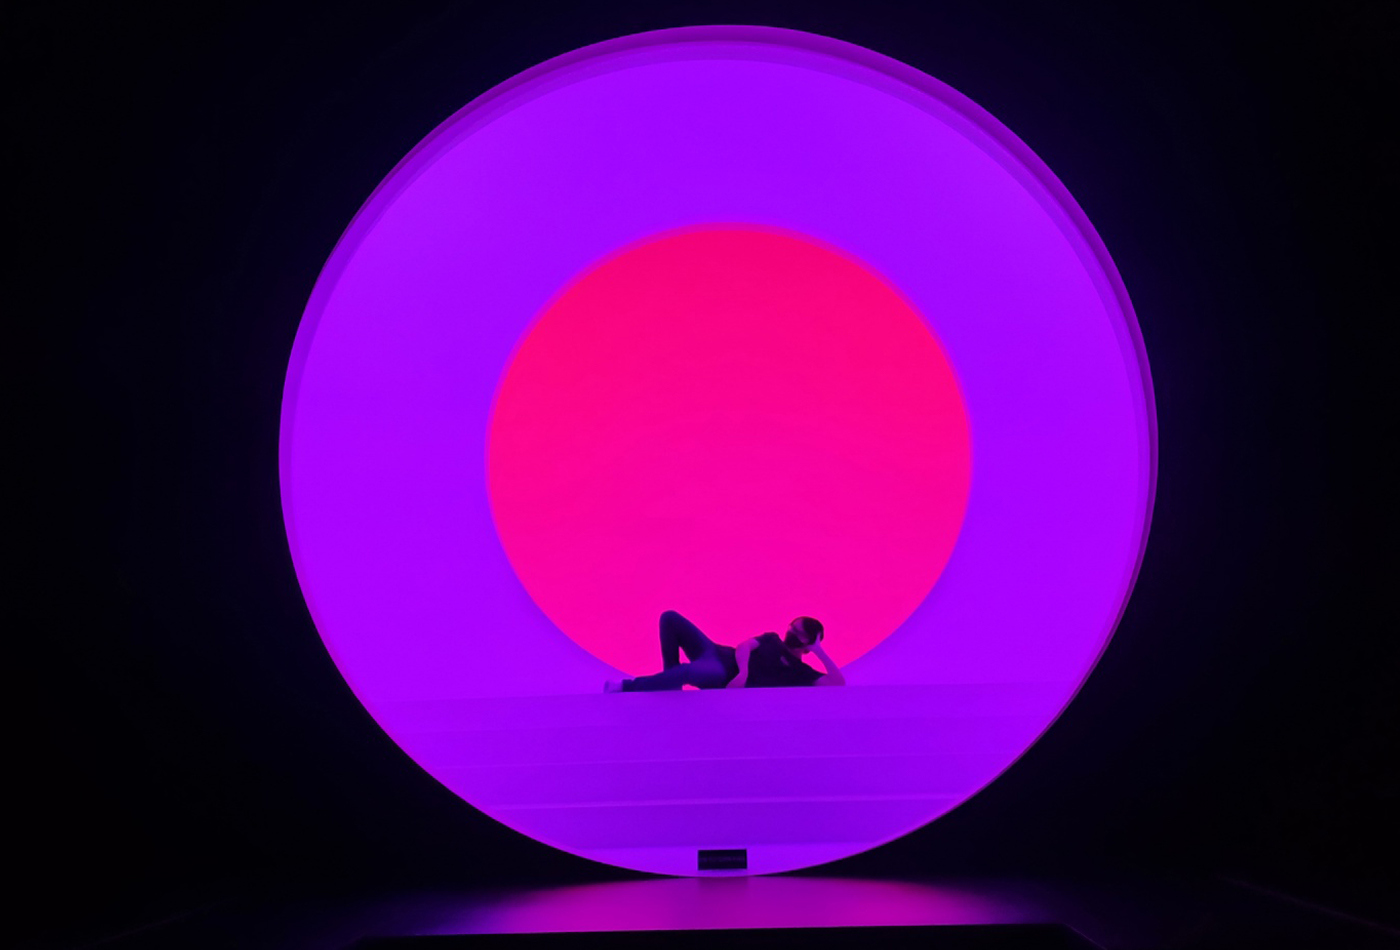 Michael Lee lays on his side, backlit by an art installation that is a lit purple circle with a smaller pink circle inside of it. Michael is a dark shadow in front of these two circles.